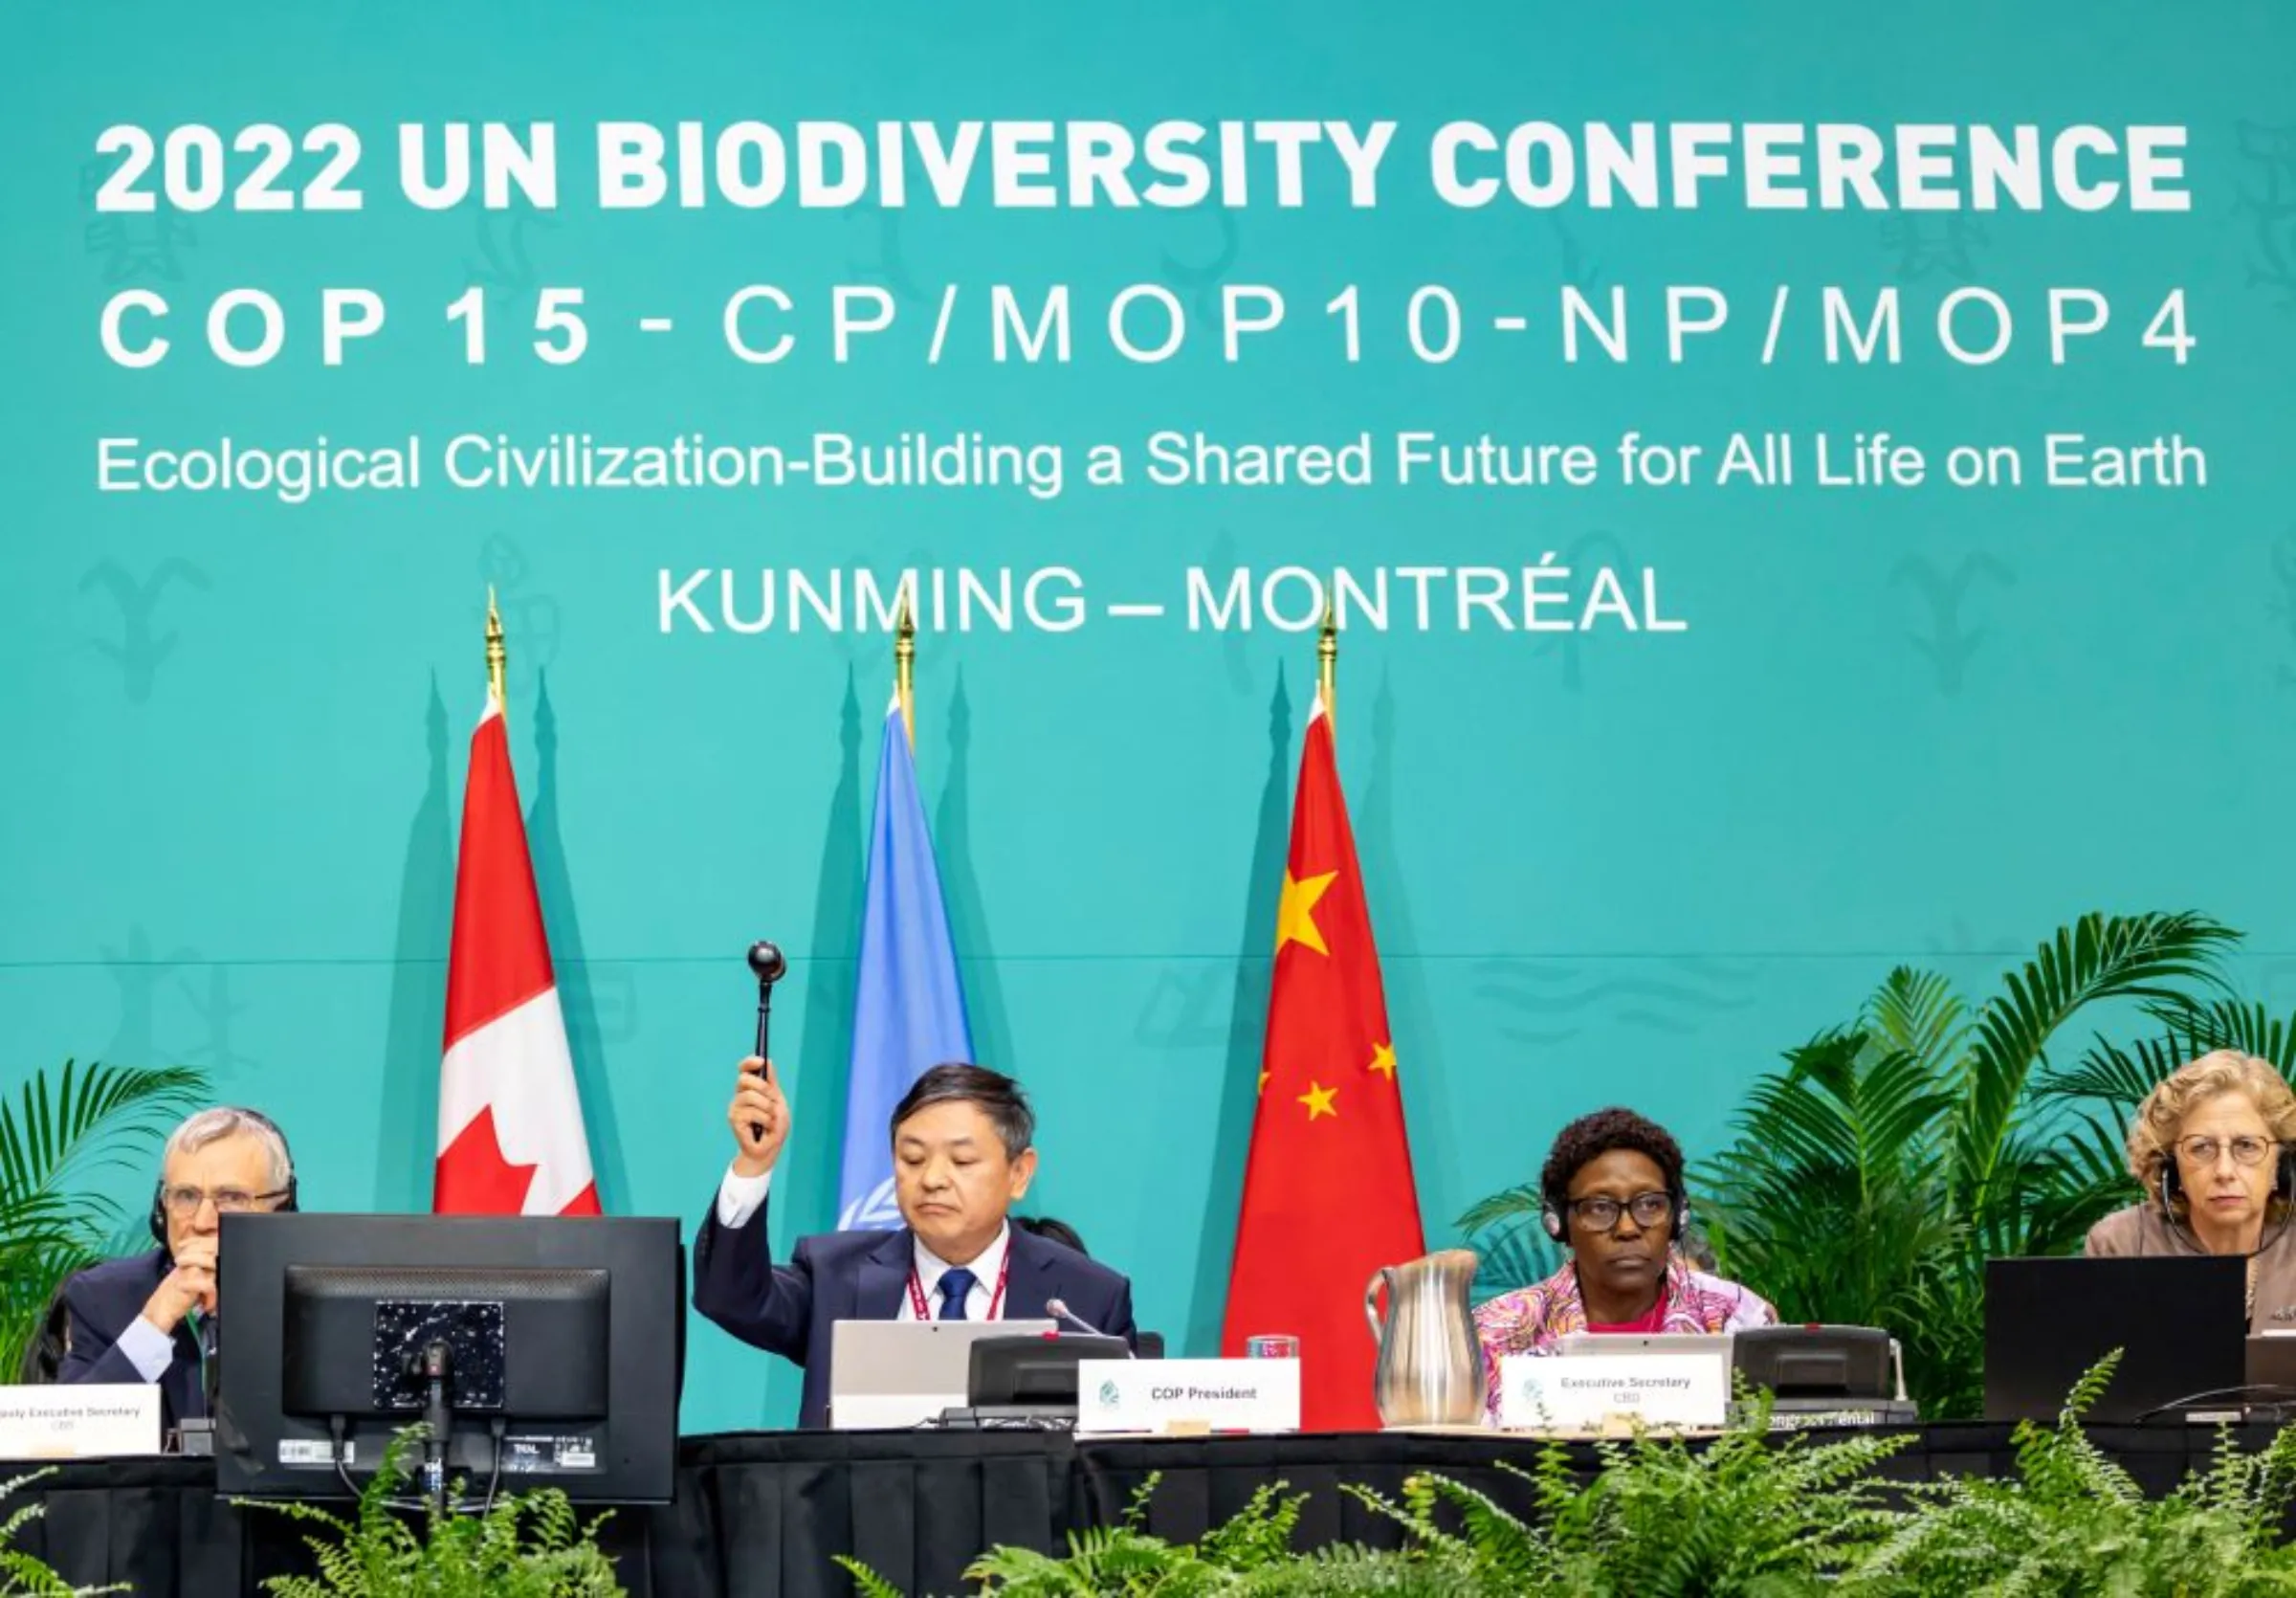 The president of the U.N.-backed COP15 biodiversity conference, China's Minister of Ecology and Environment Huang Runqiu, lowers the gavel to pass the The Kunming-Montreal Global Biodiversity Framework in Montreal, Quebec, Canada December 19, 2022